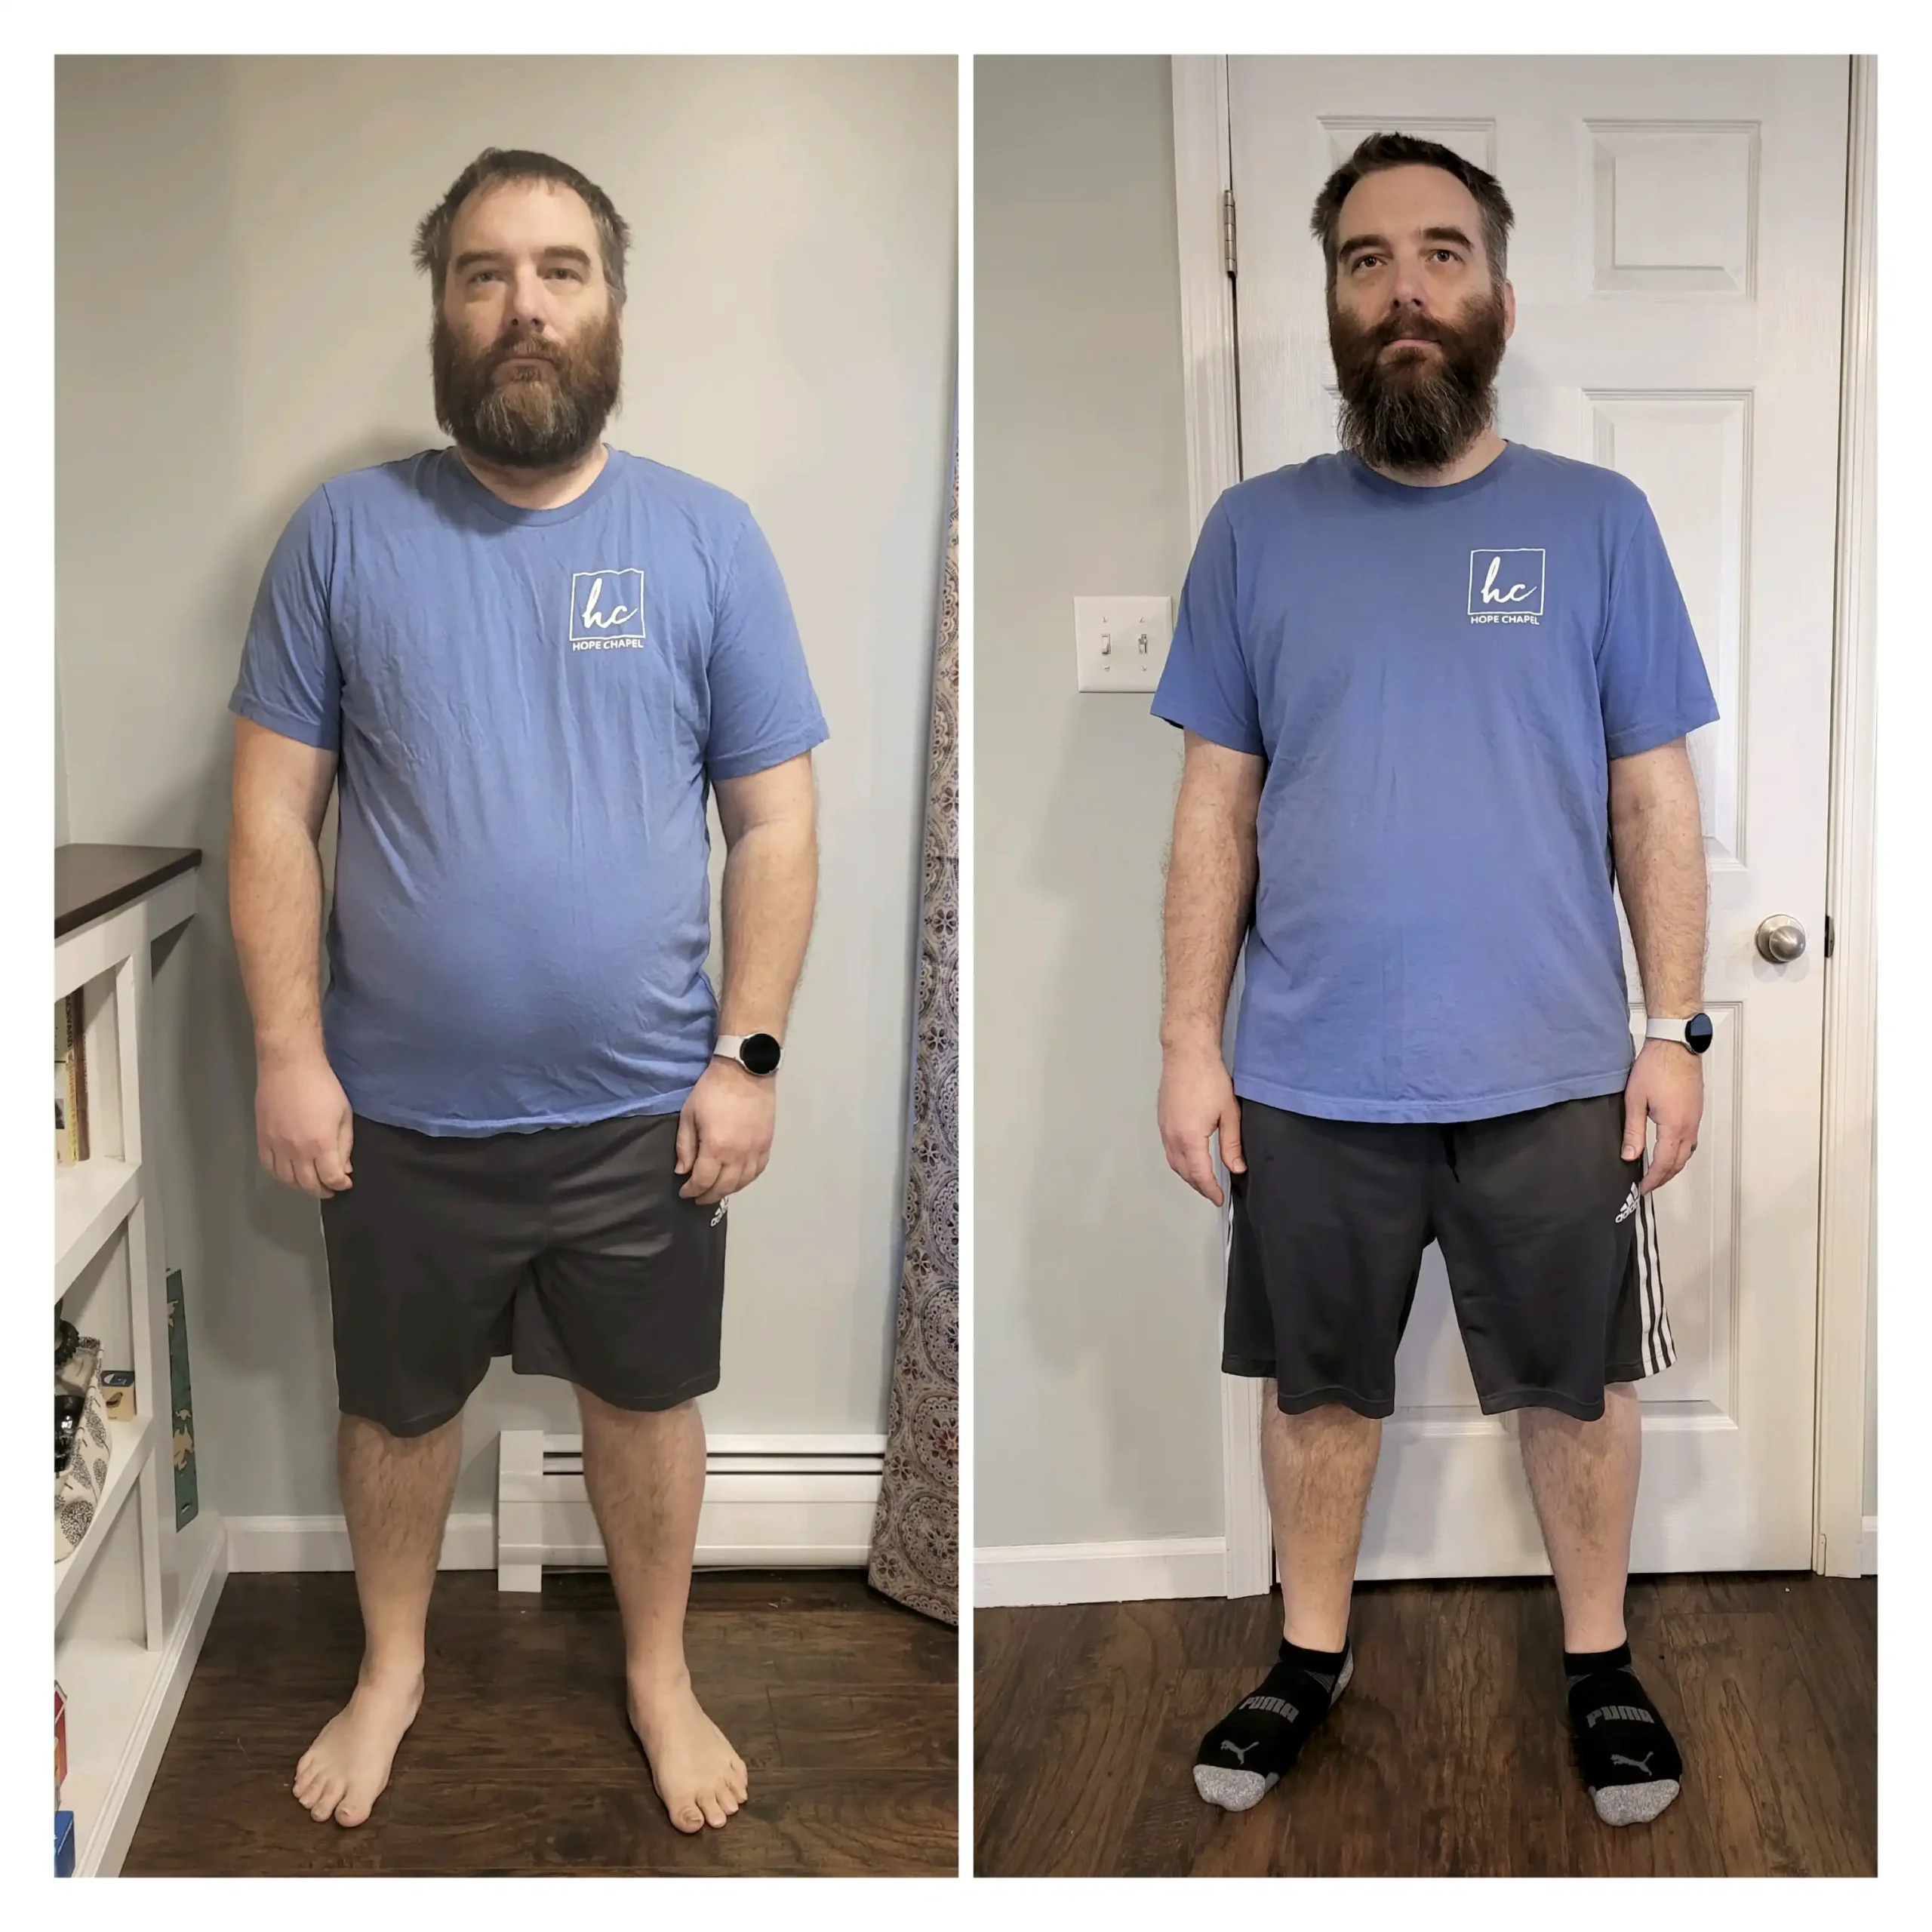 Dan before and after weight loss - front